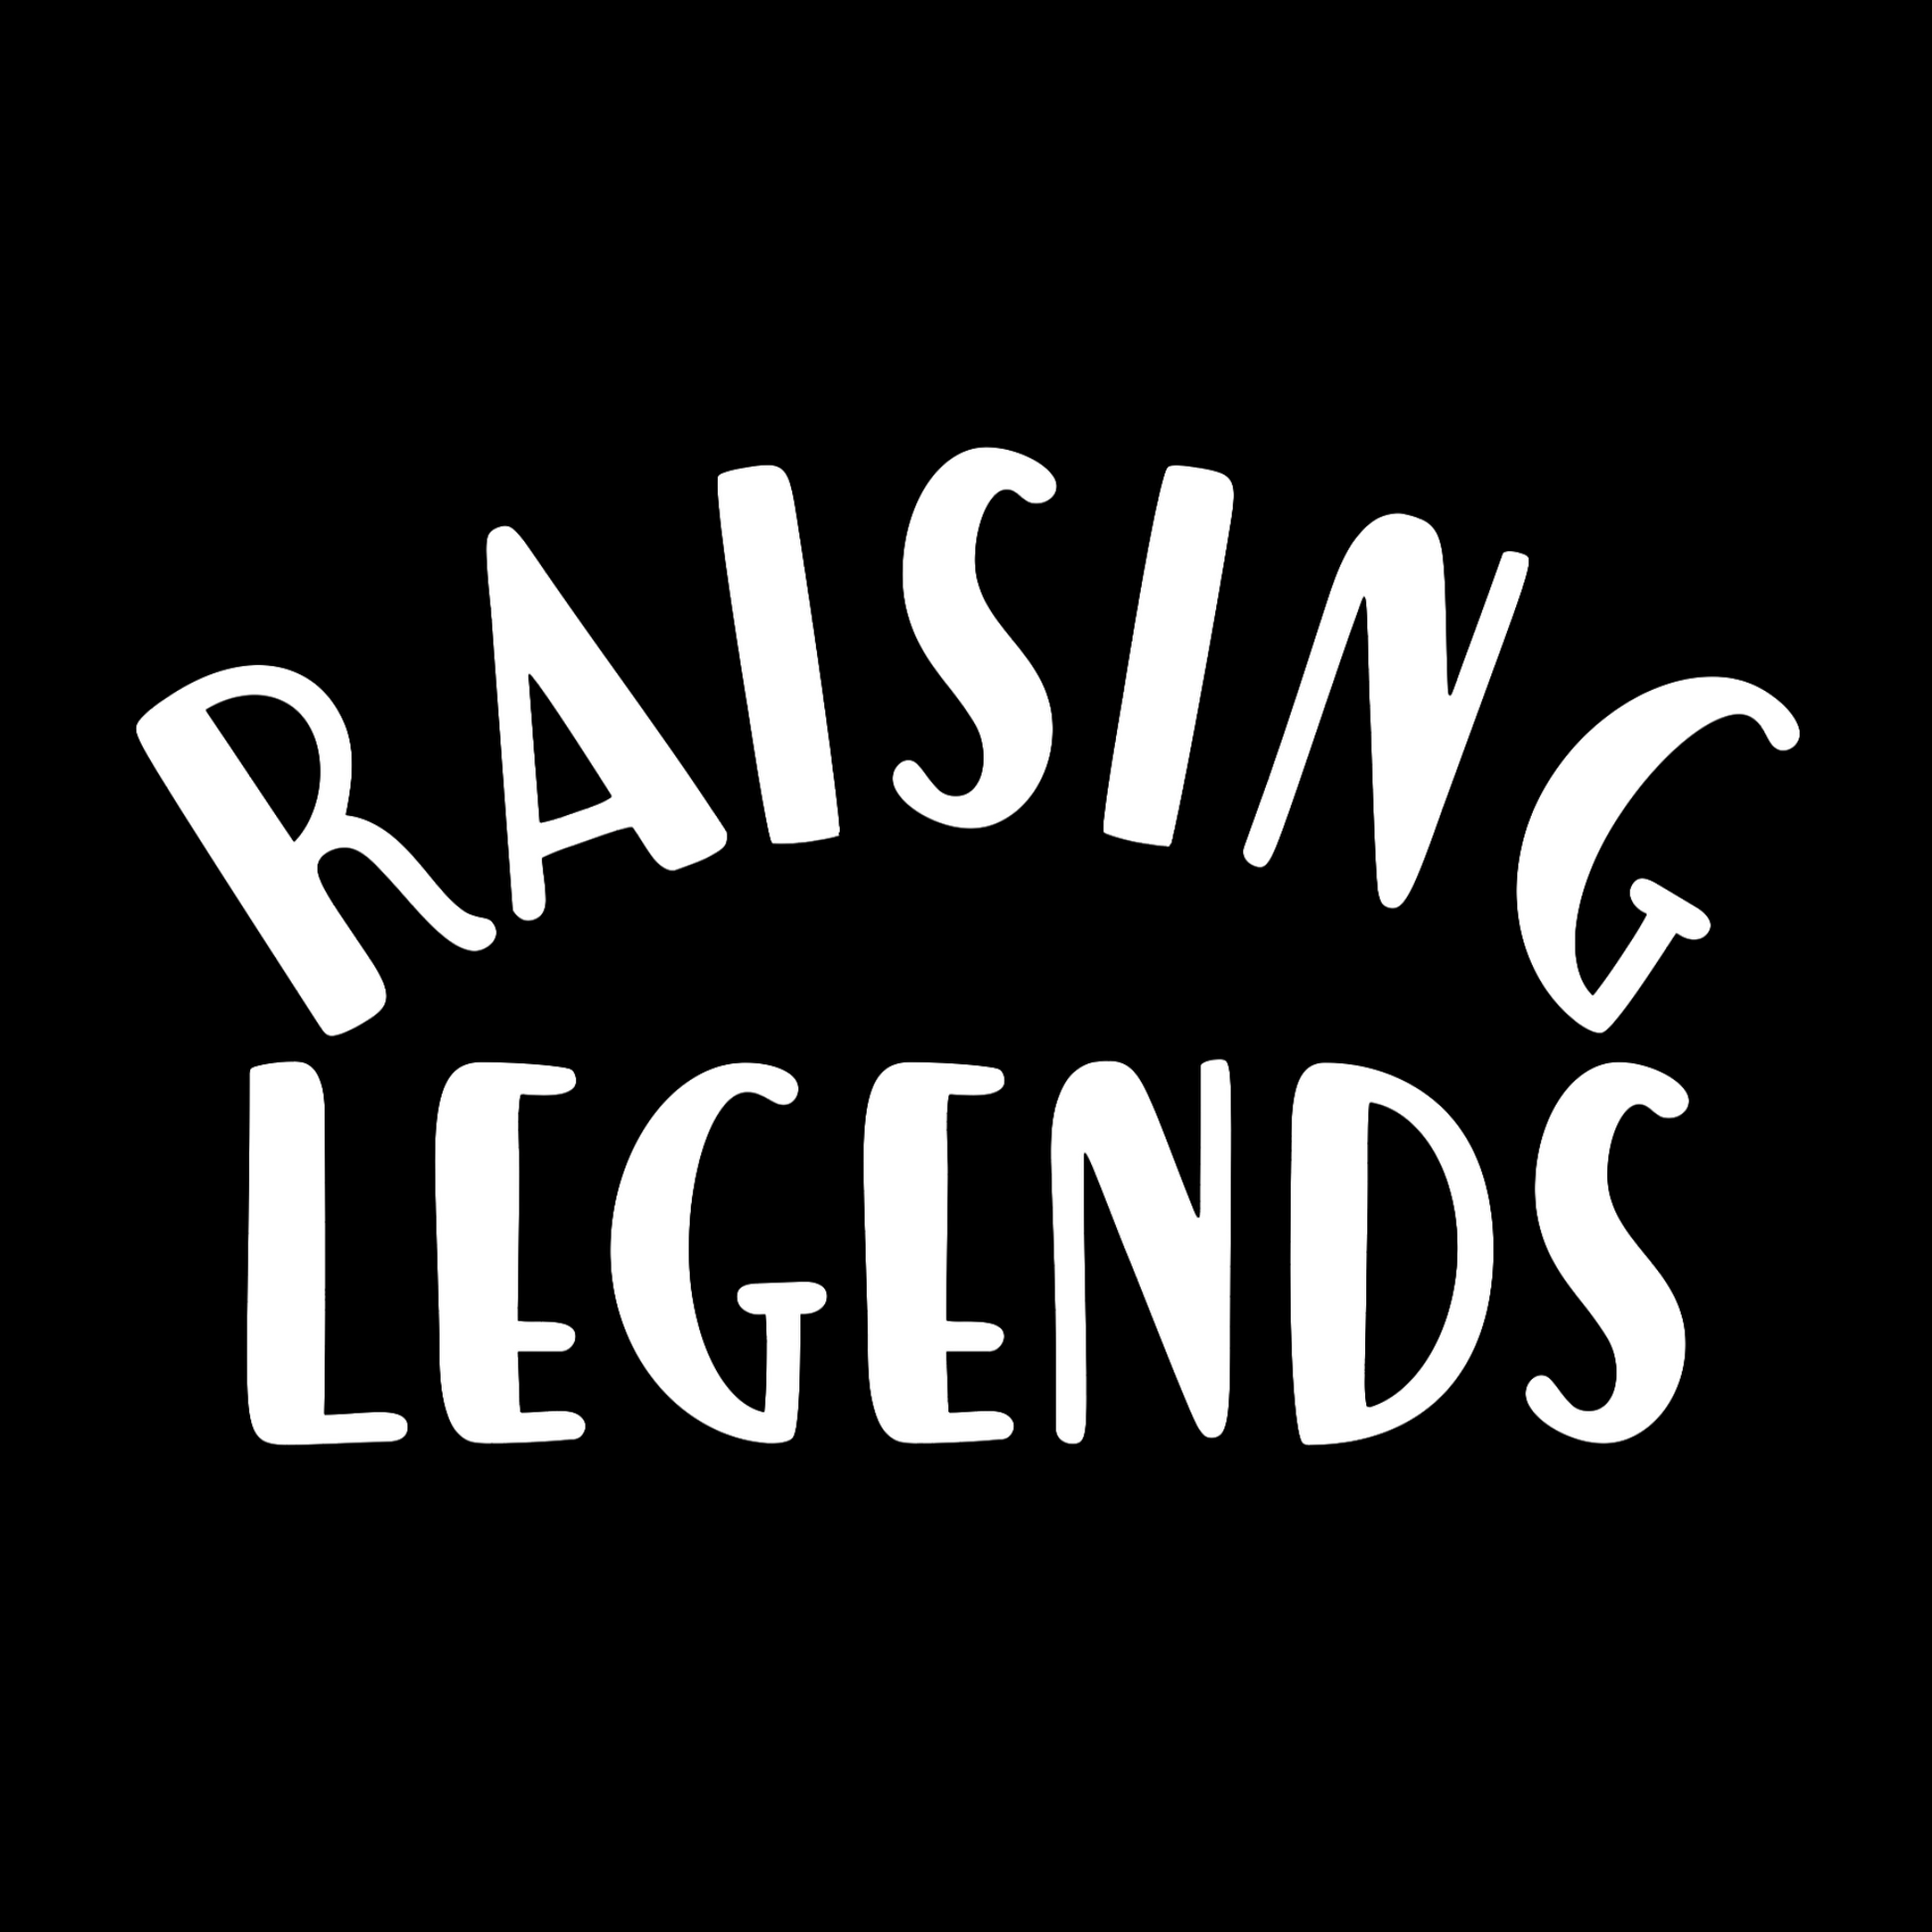 Raising Legends Black Sweatshirt Hoodie - Front ViewRaising Legends - Hooded Sweatshirt in black with white writing. Raising is curve at the top and legends is straight on the bottom. Features an innovative print process that raises the ink for a more defined design. This is an image of the design on a black background.